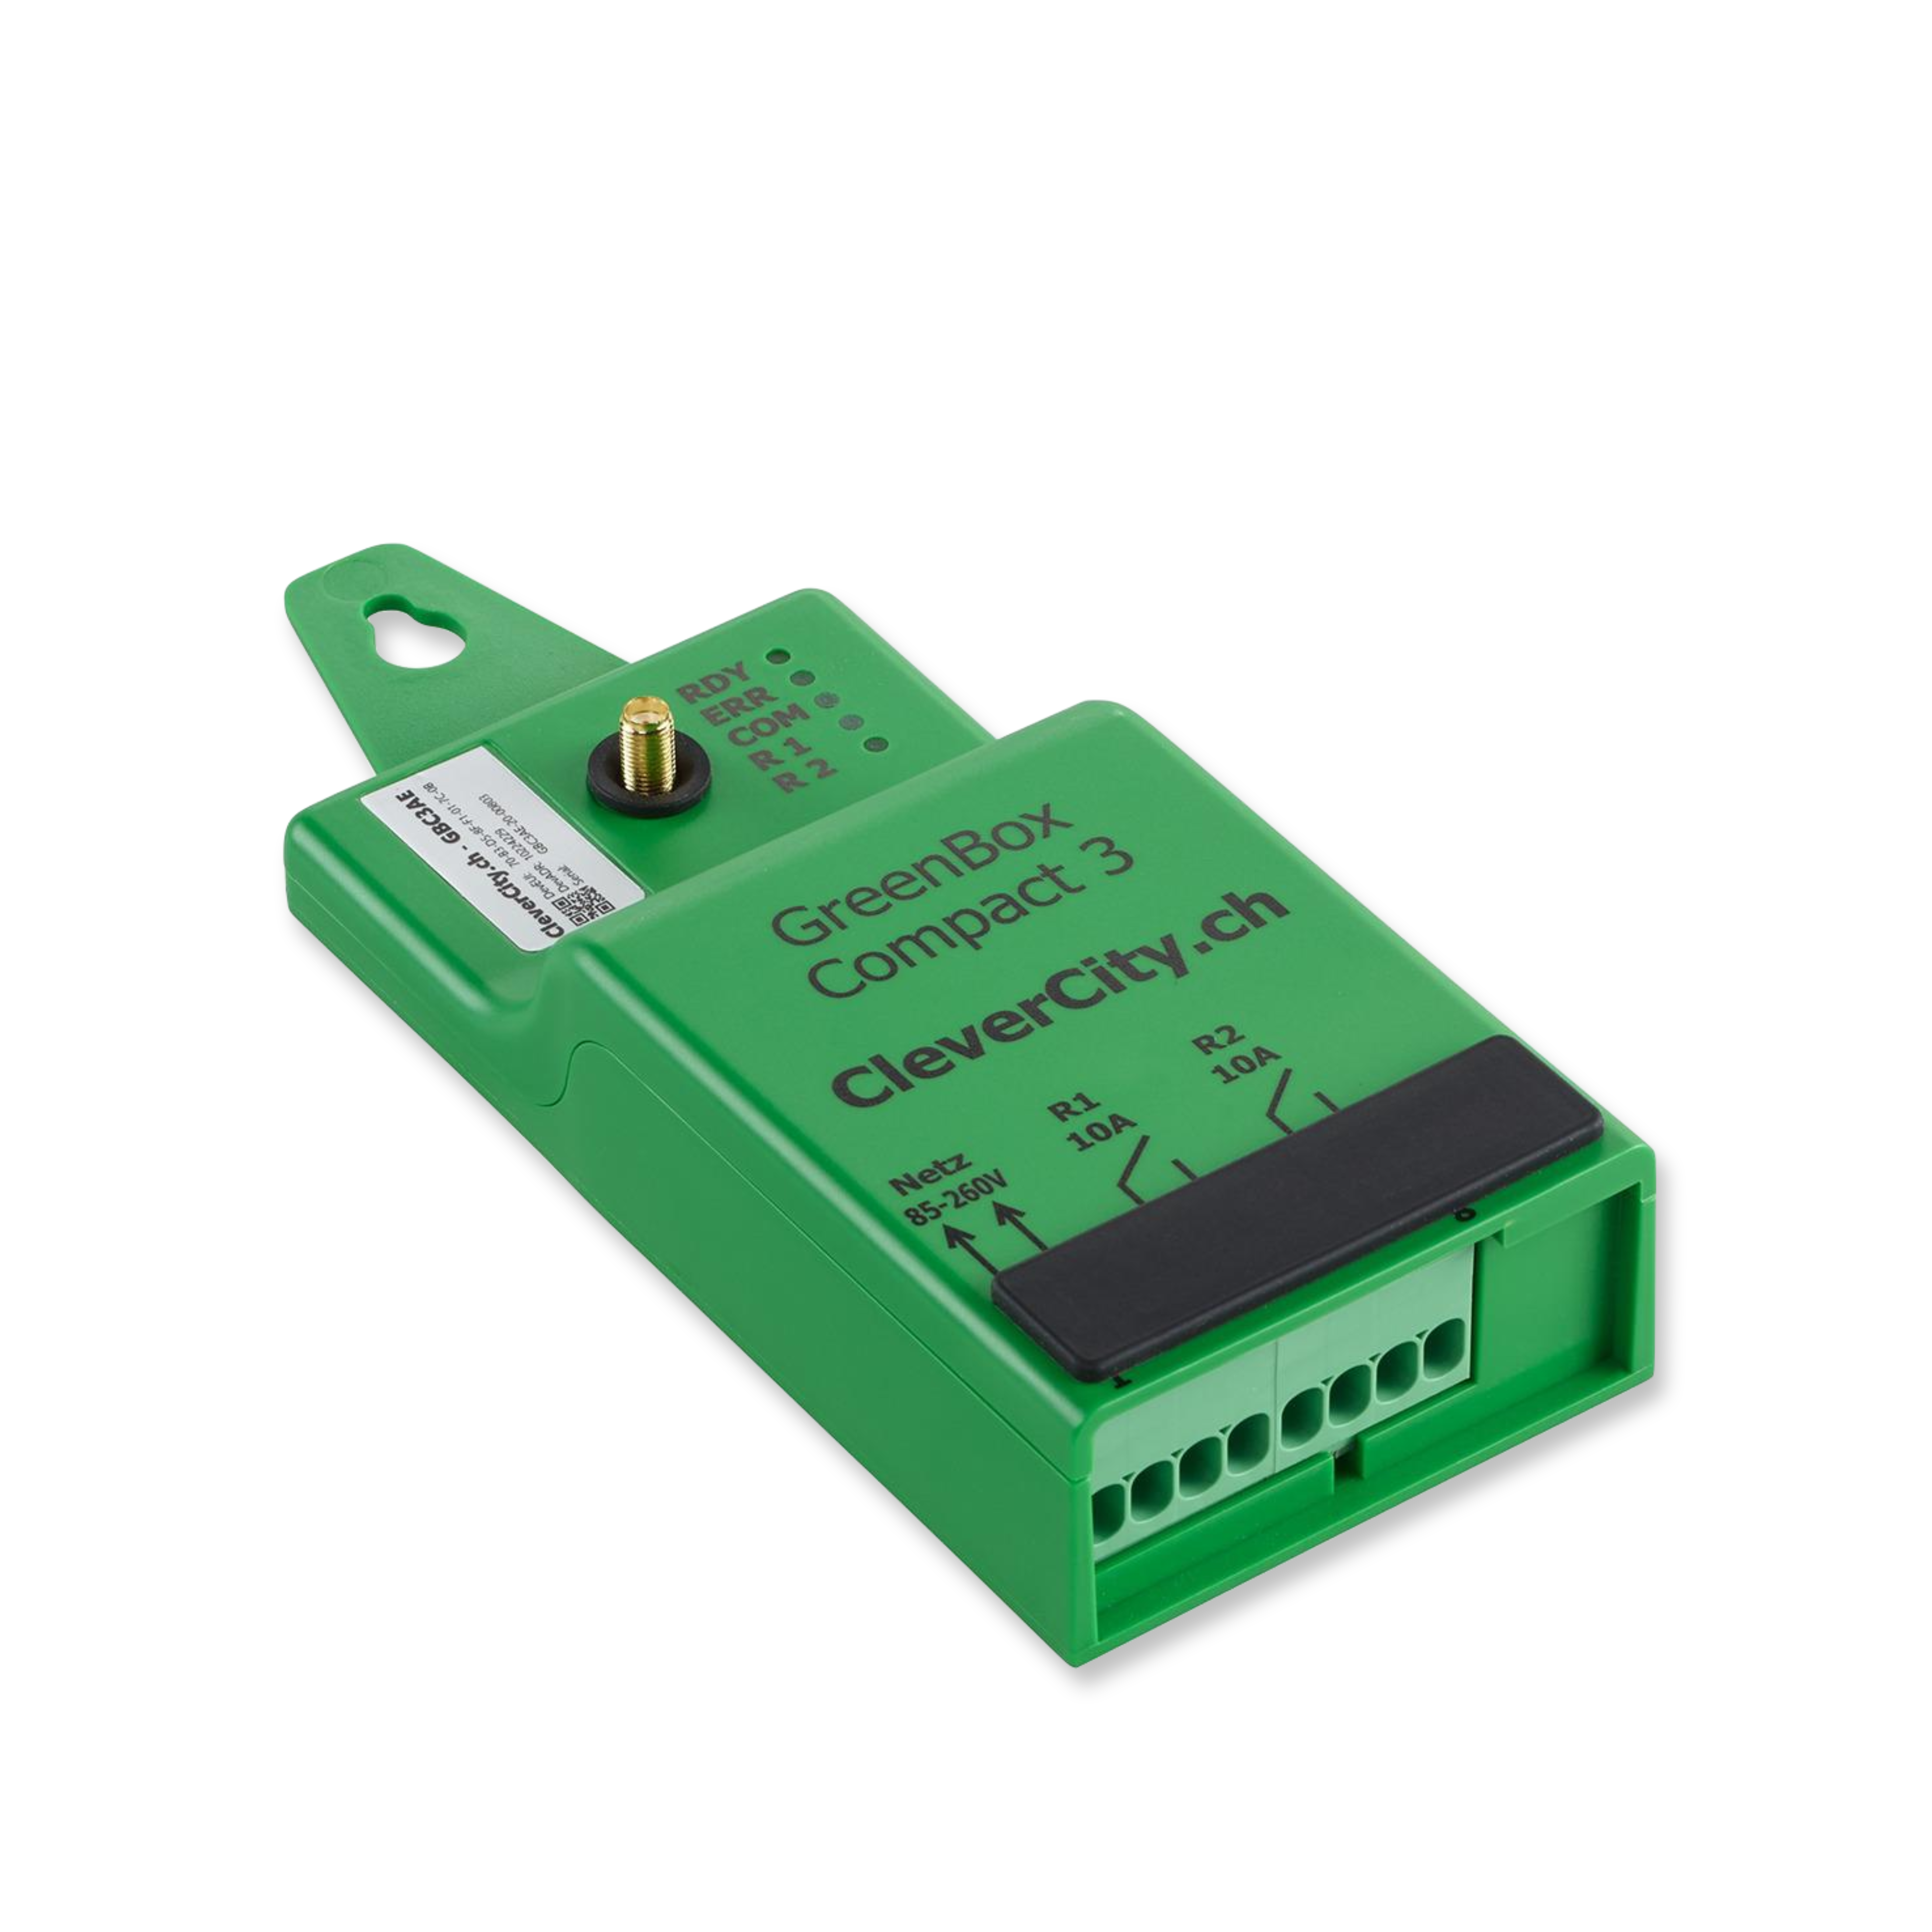 CleverCity Greenbox Compact 3 time switch for controlling street lighting